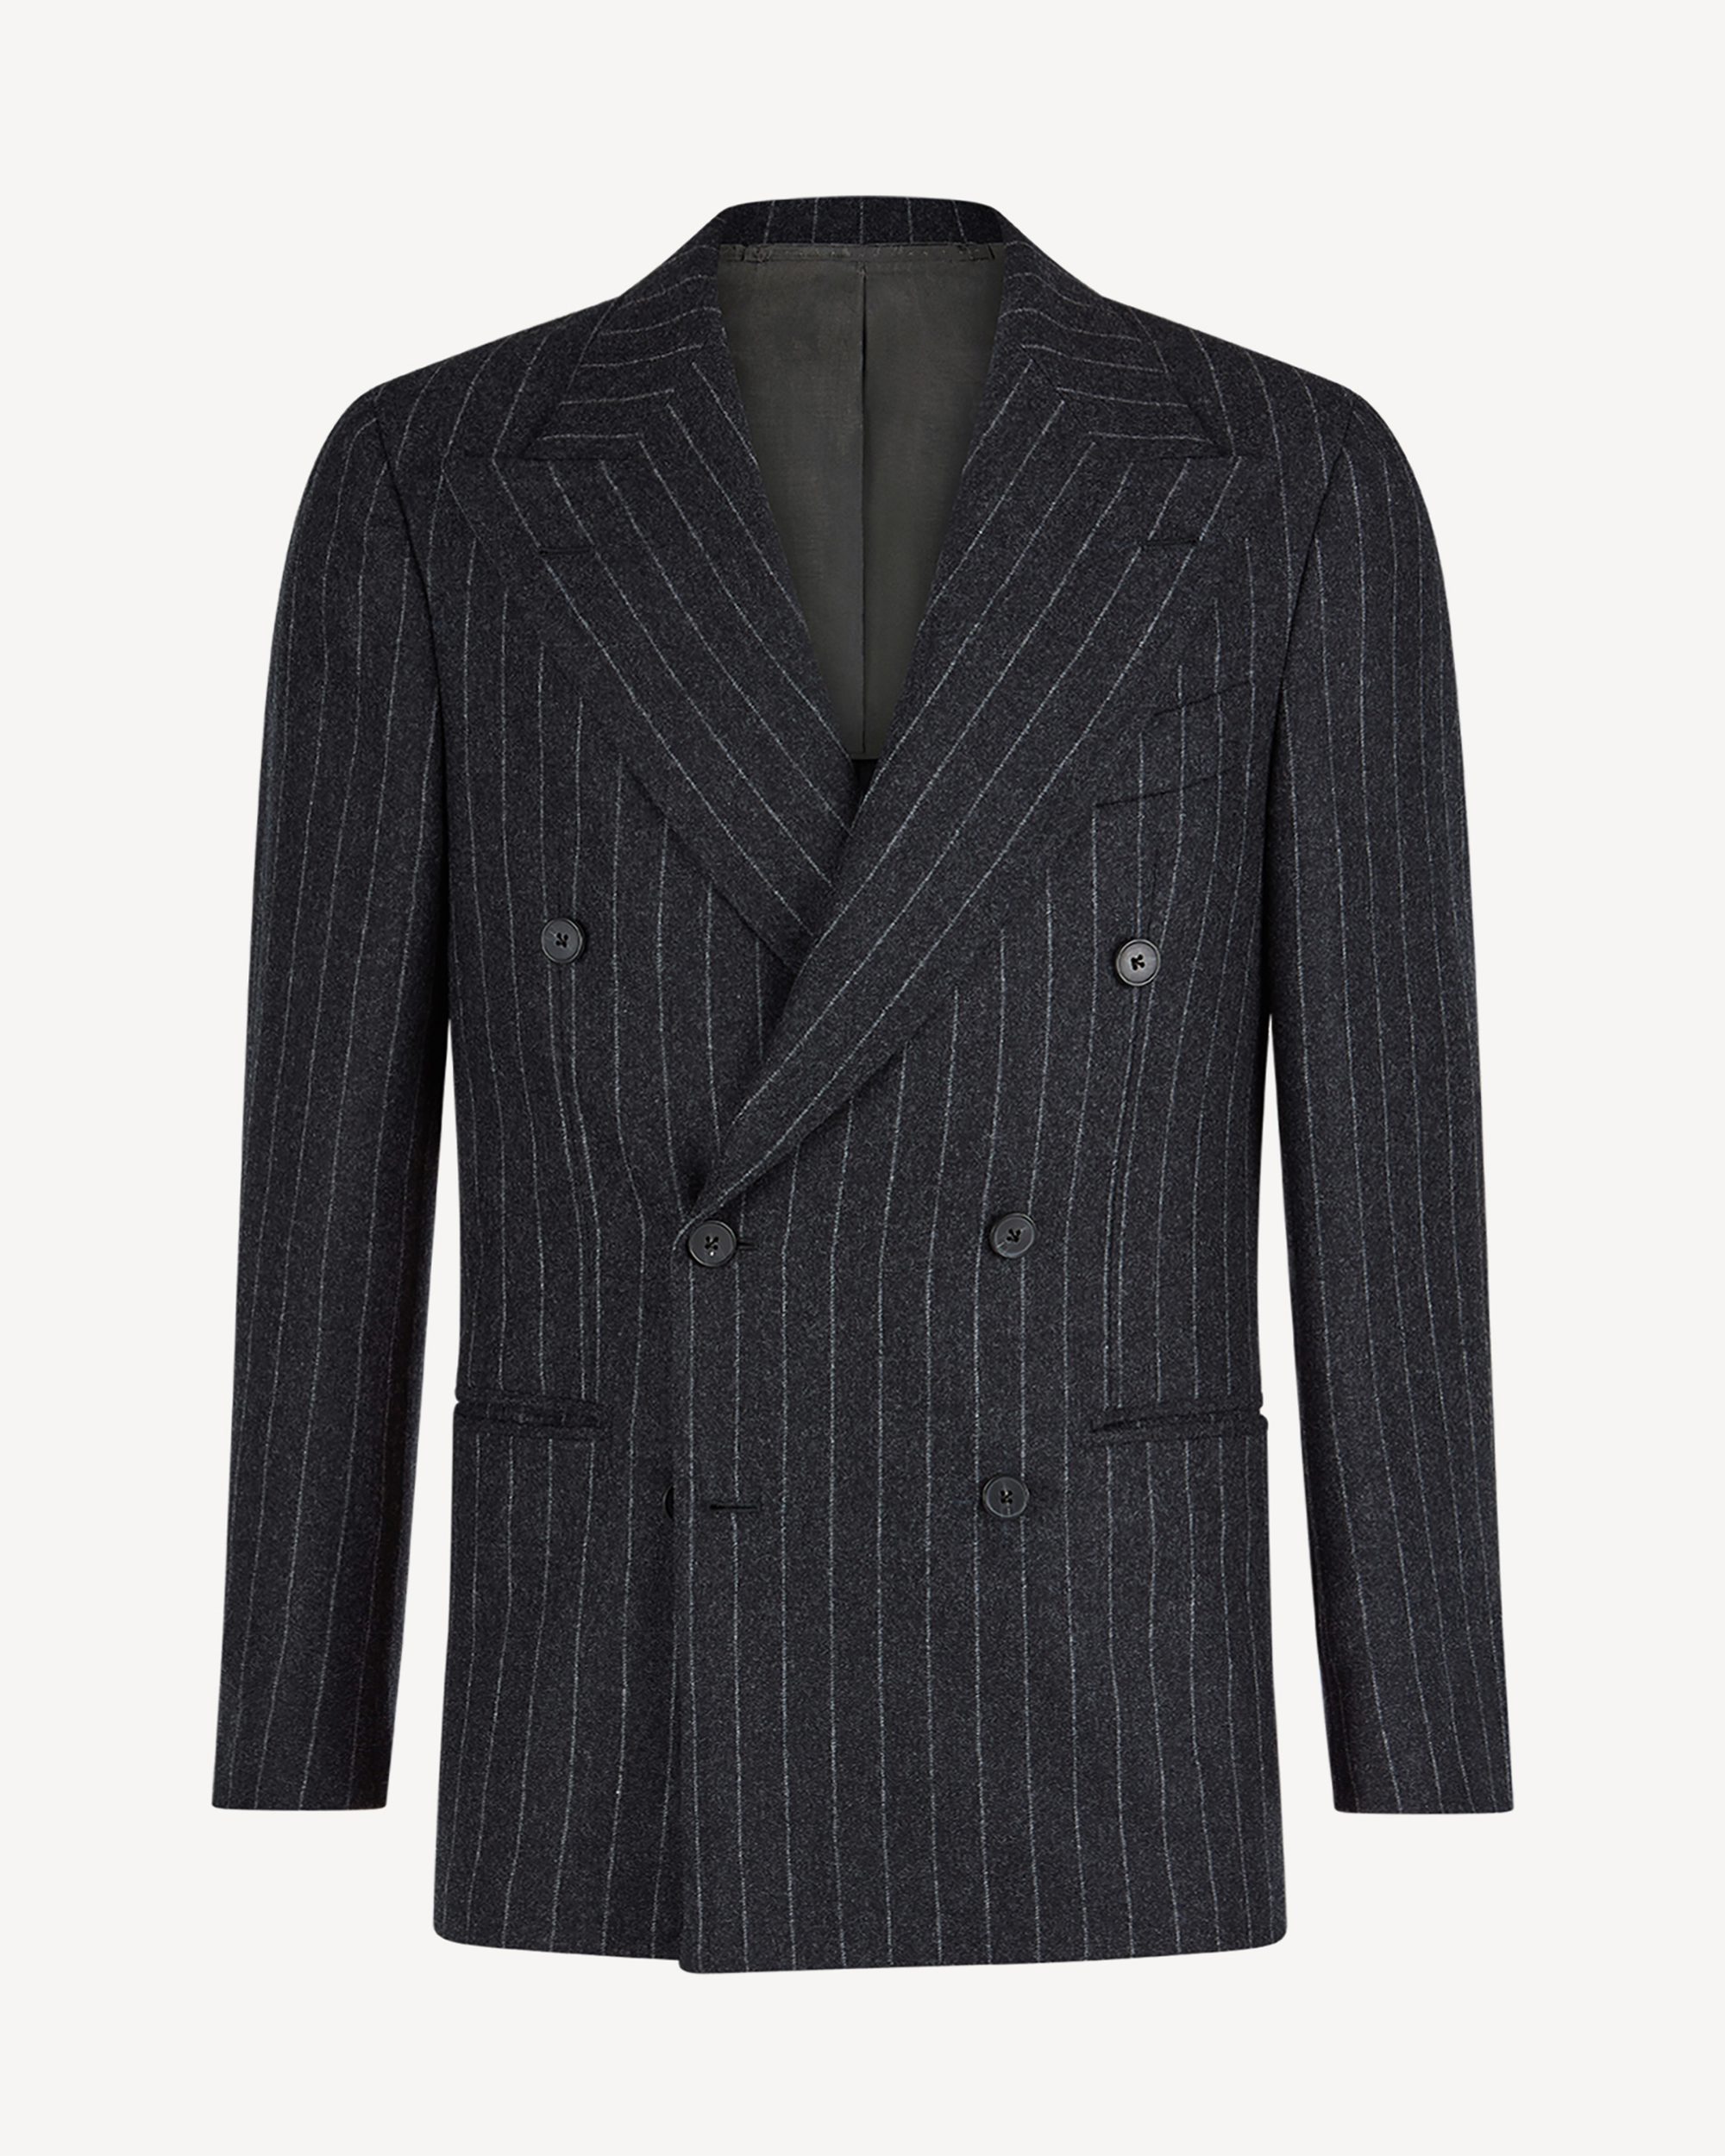 Sartorial Flannel Double Breasted Suit - Grey Chalk Stripe VBC | Viola ...